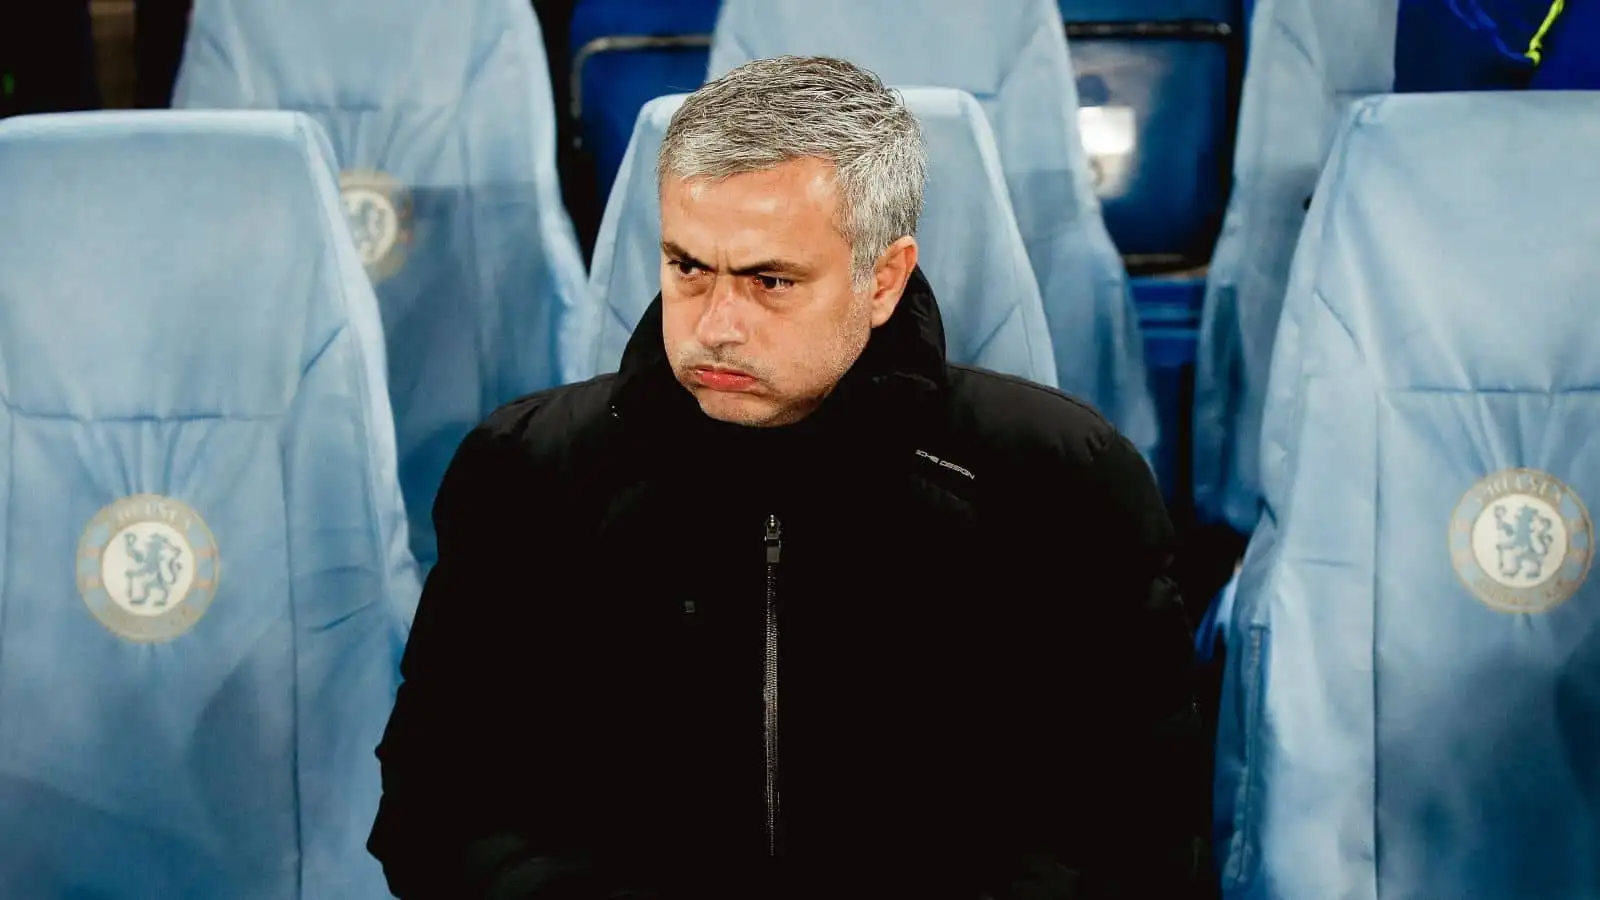 Jose Mourinho (Chelsea) Football/Soccer : Chelsea Manager Jose Mourinho during the UEFA Champions League Group Stage match between Chelsea and Sporting Clube de Portugal at Stamford Bridge in London